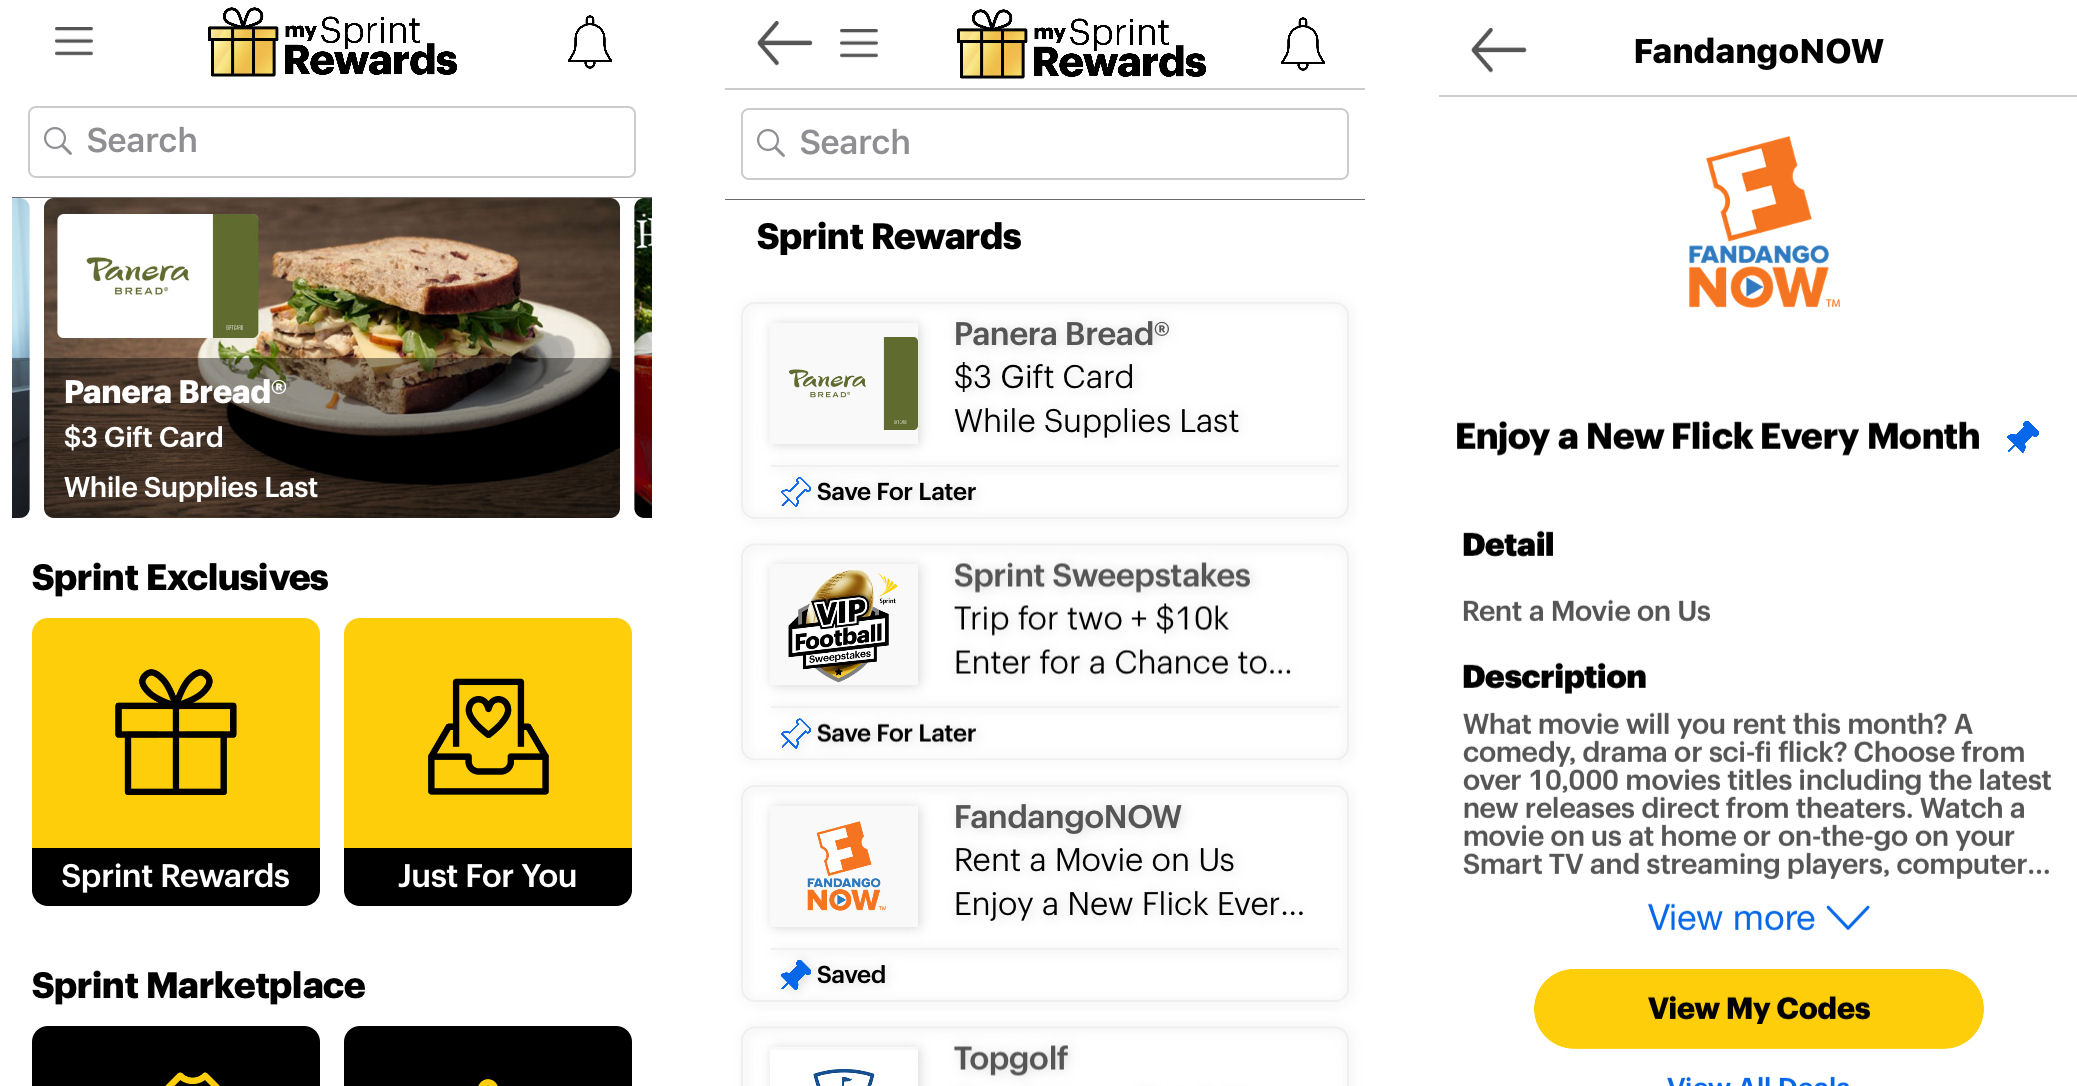 Sprint Users - Grab Your *Free* $3 Panera Bread Gift Card Now!